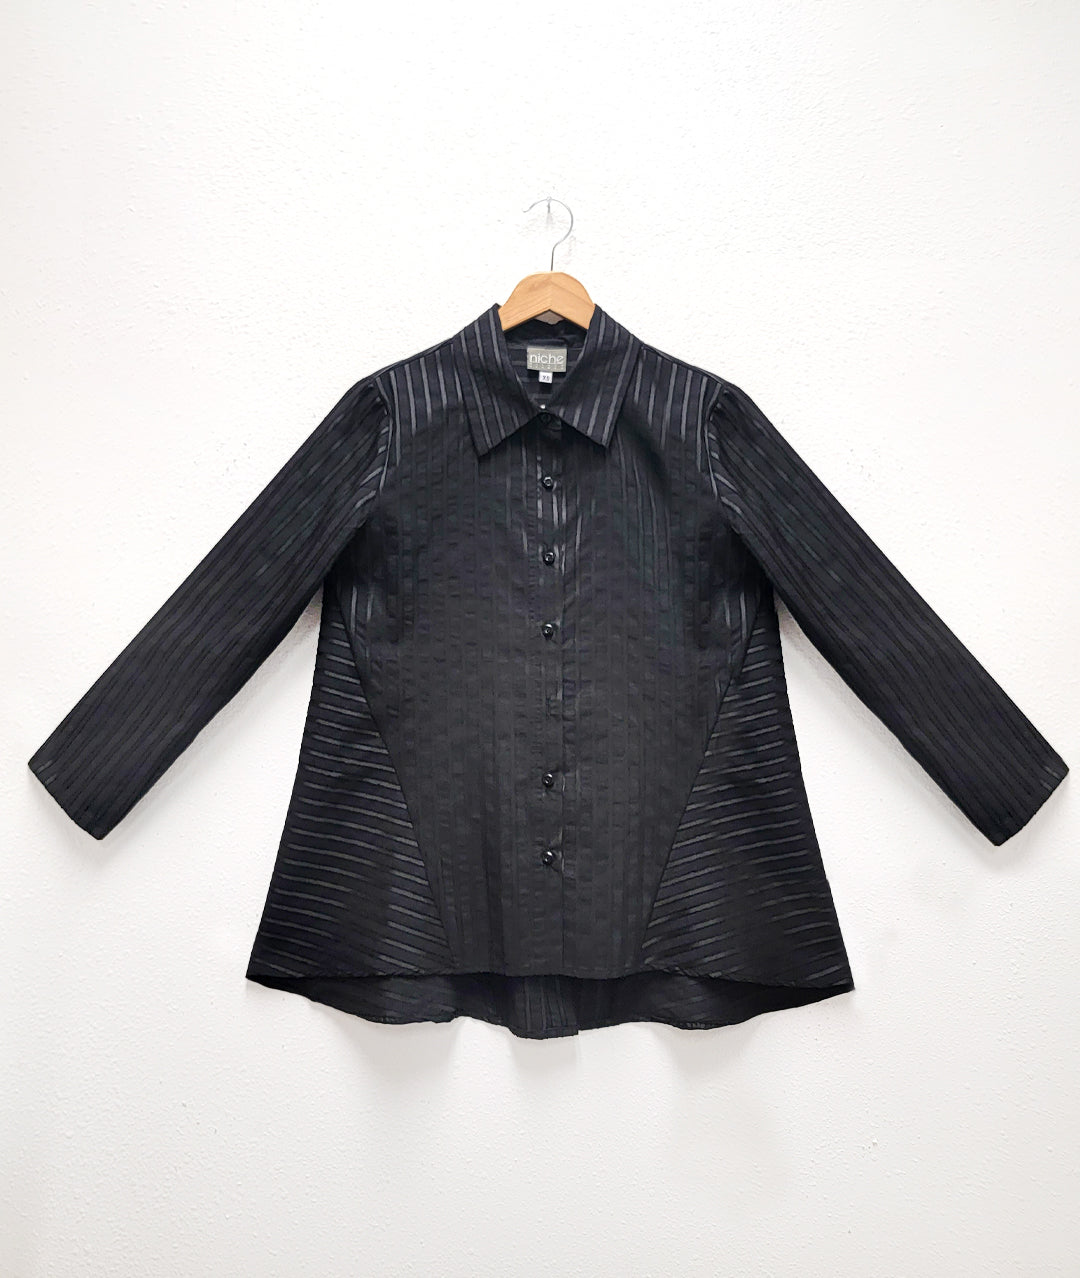 black on black striped blouse with a panel adding body on either side